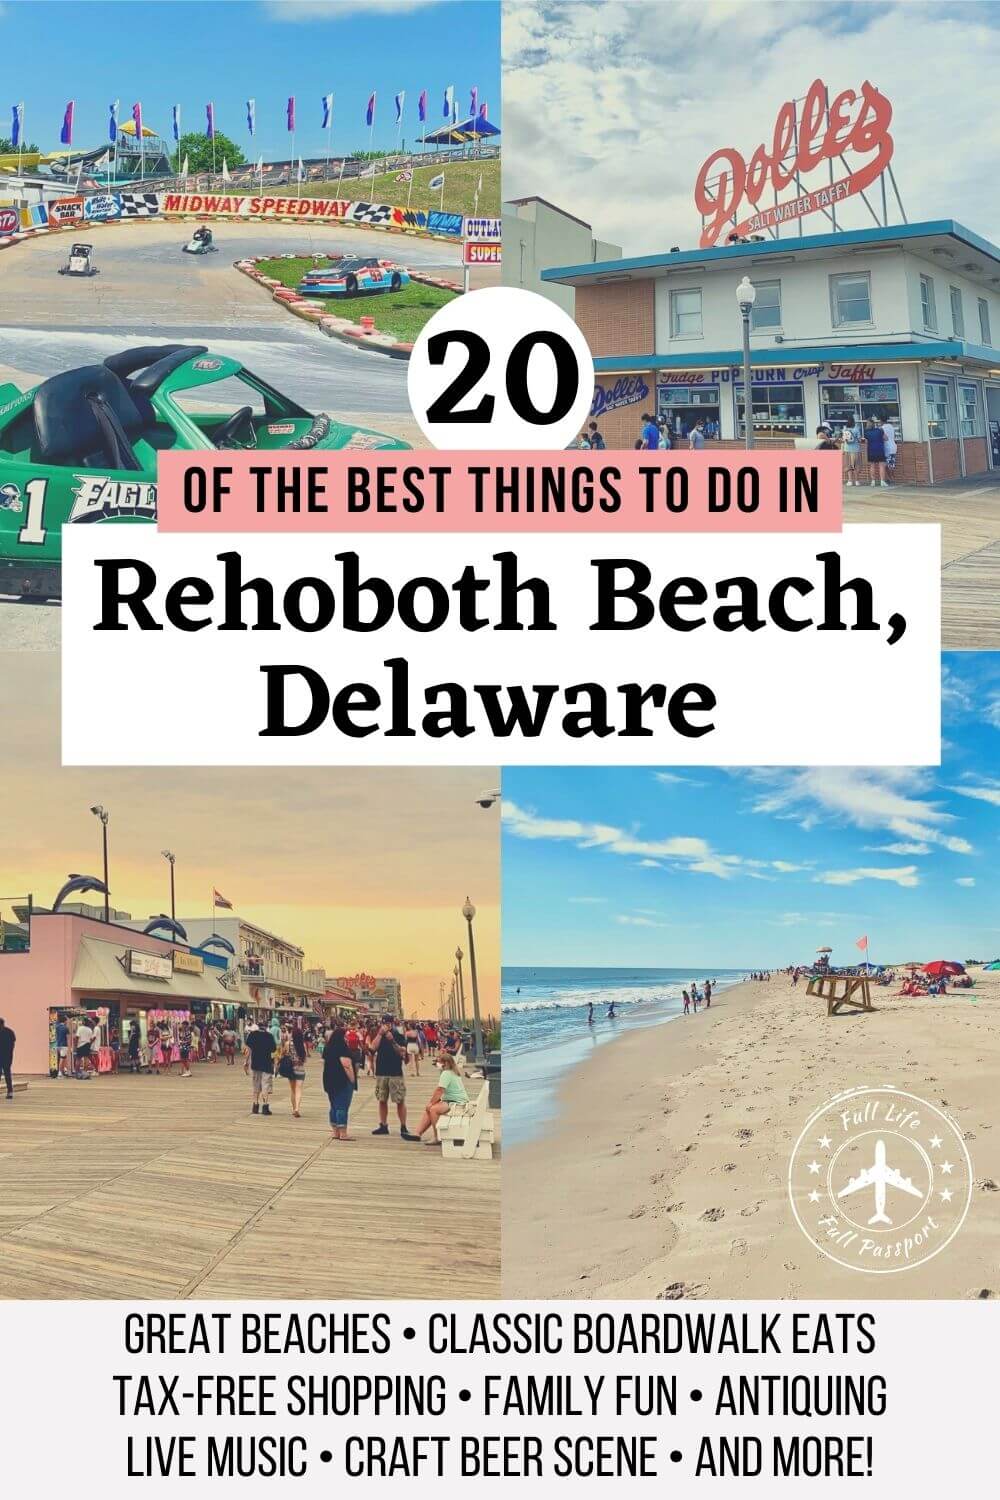 20 of the Best Things to Do in Rehoboth Beach, Delaware